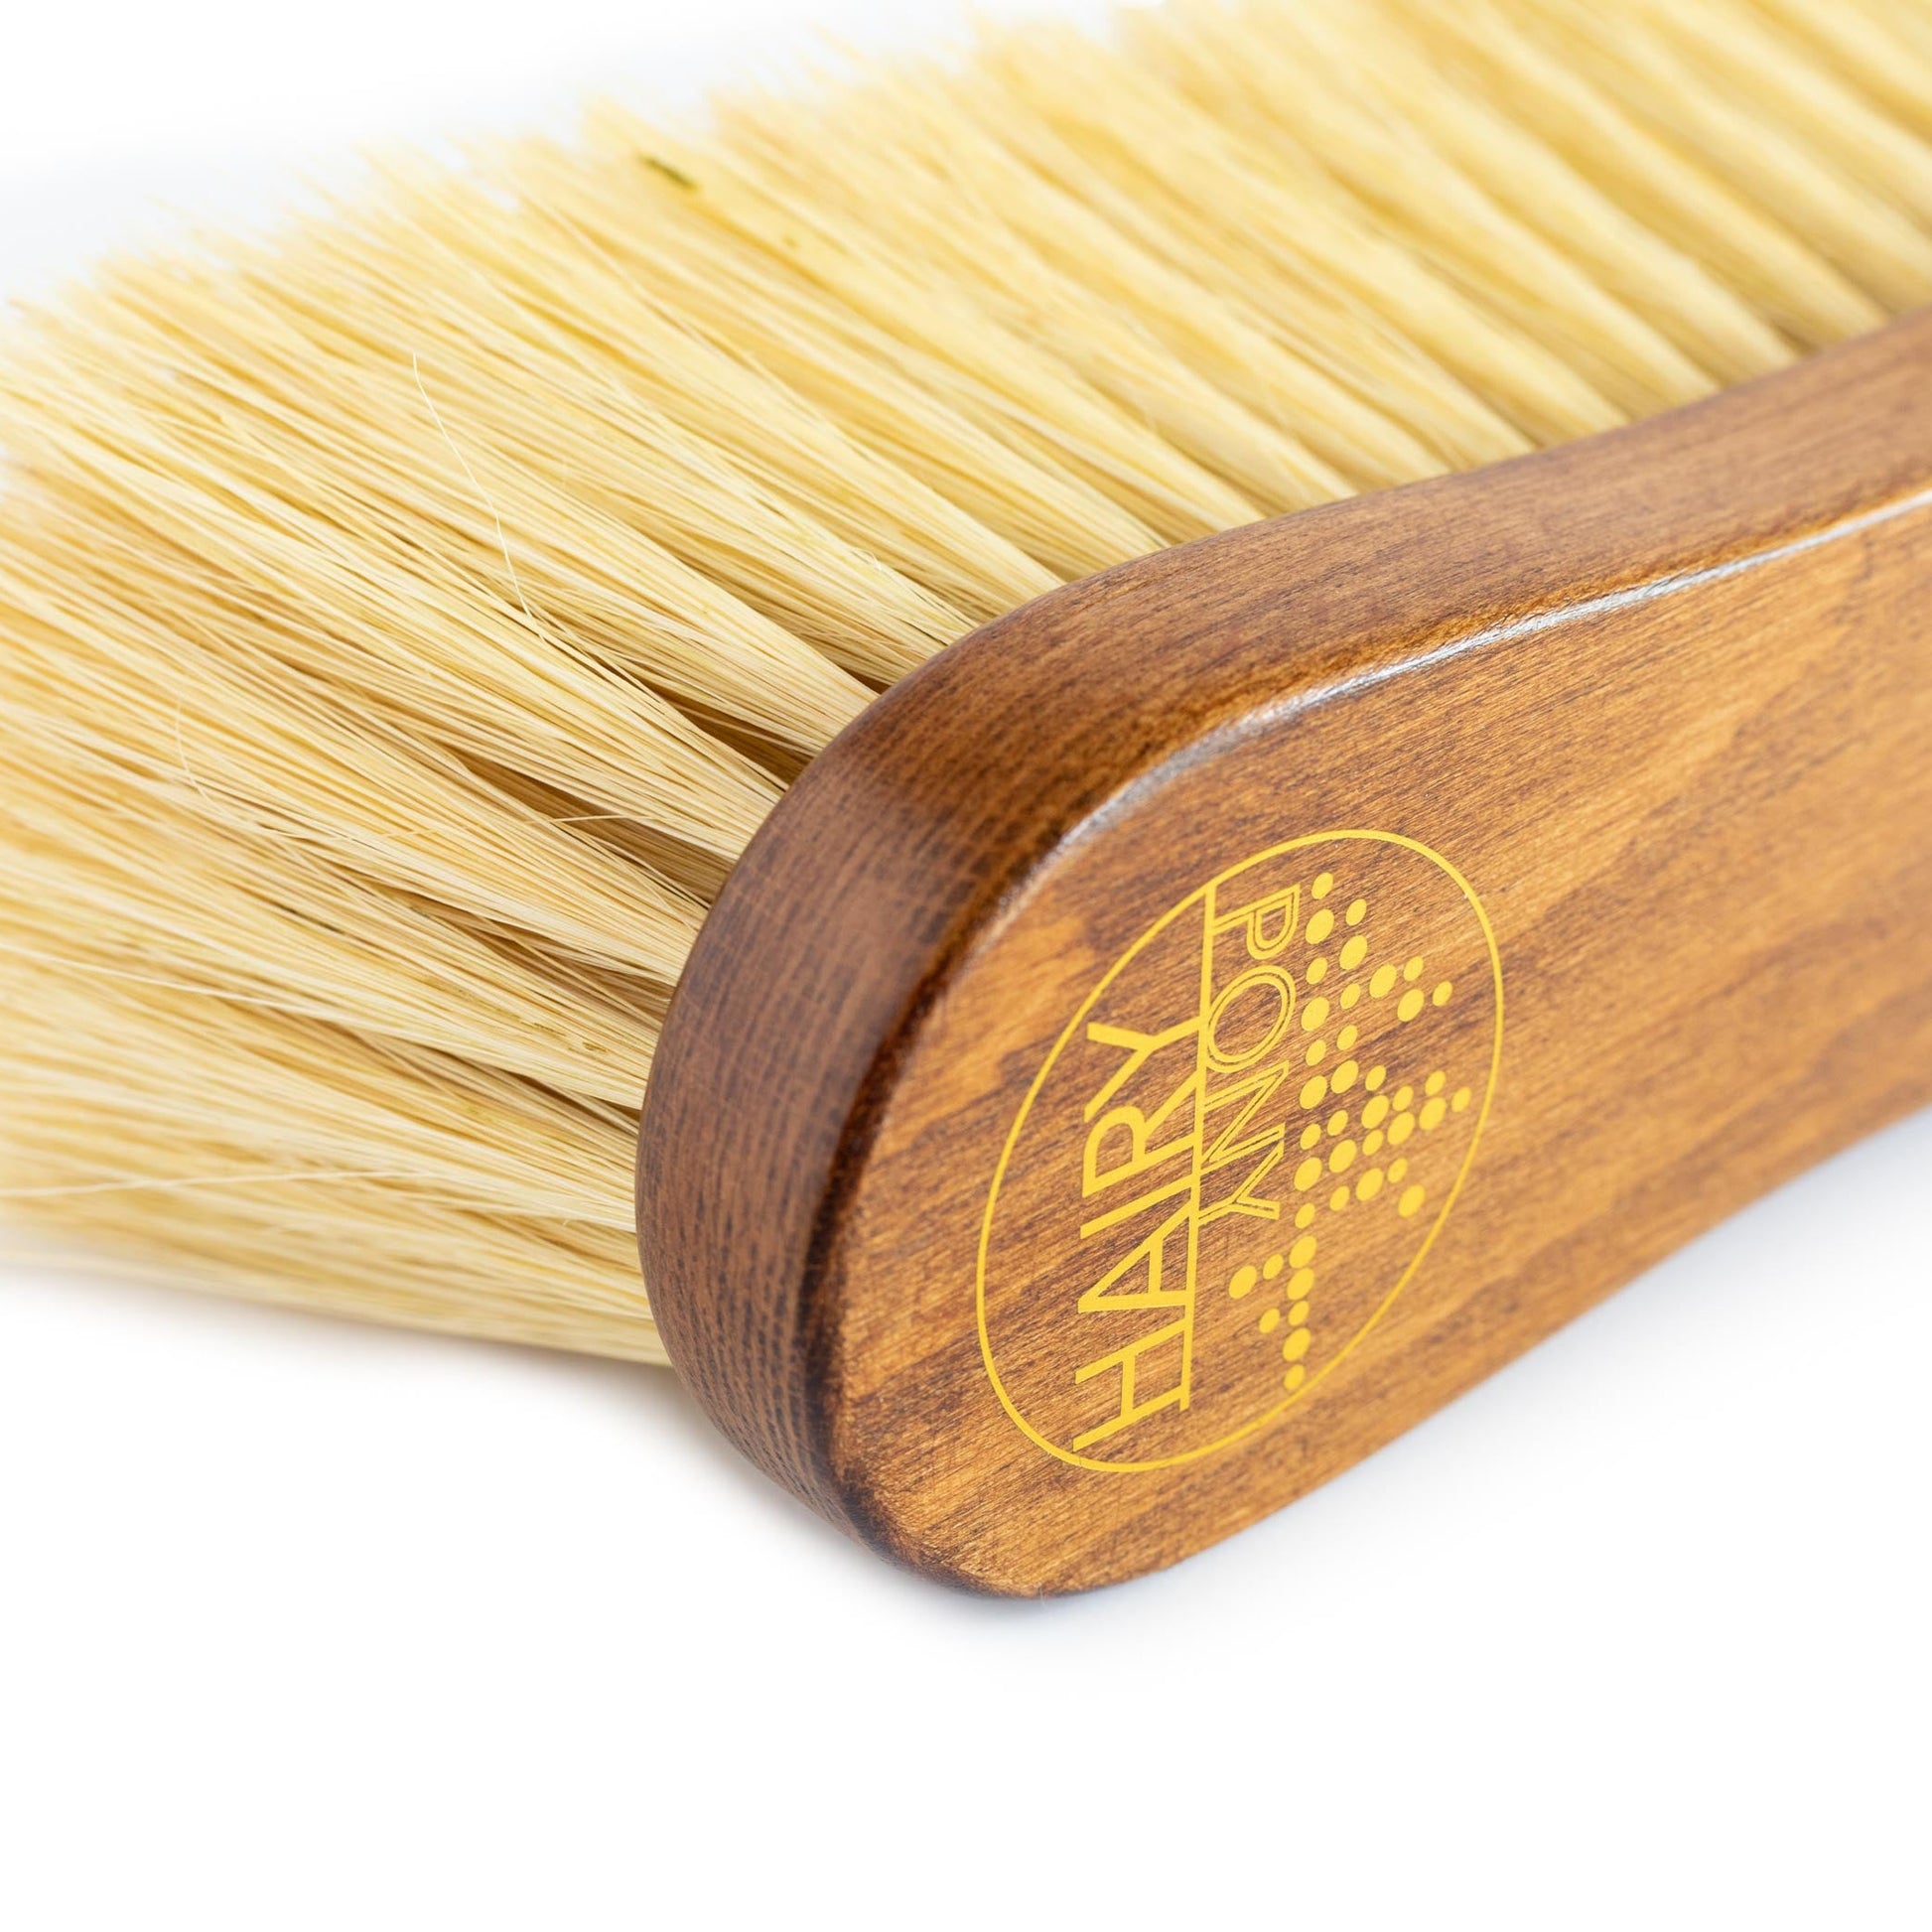 A close up view of the Hairy Pony Flick Brush, showing the long bristles and gold logo detailing.